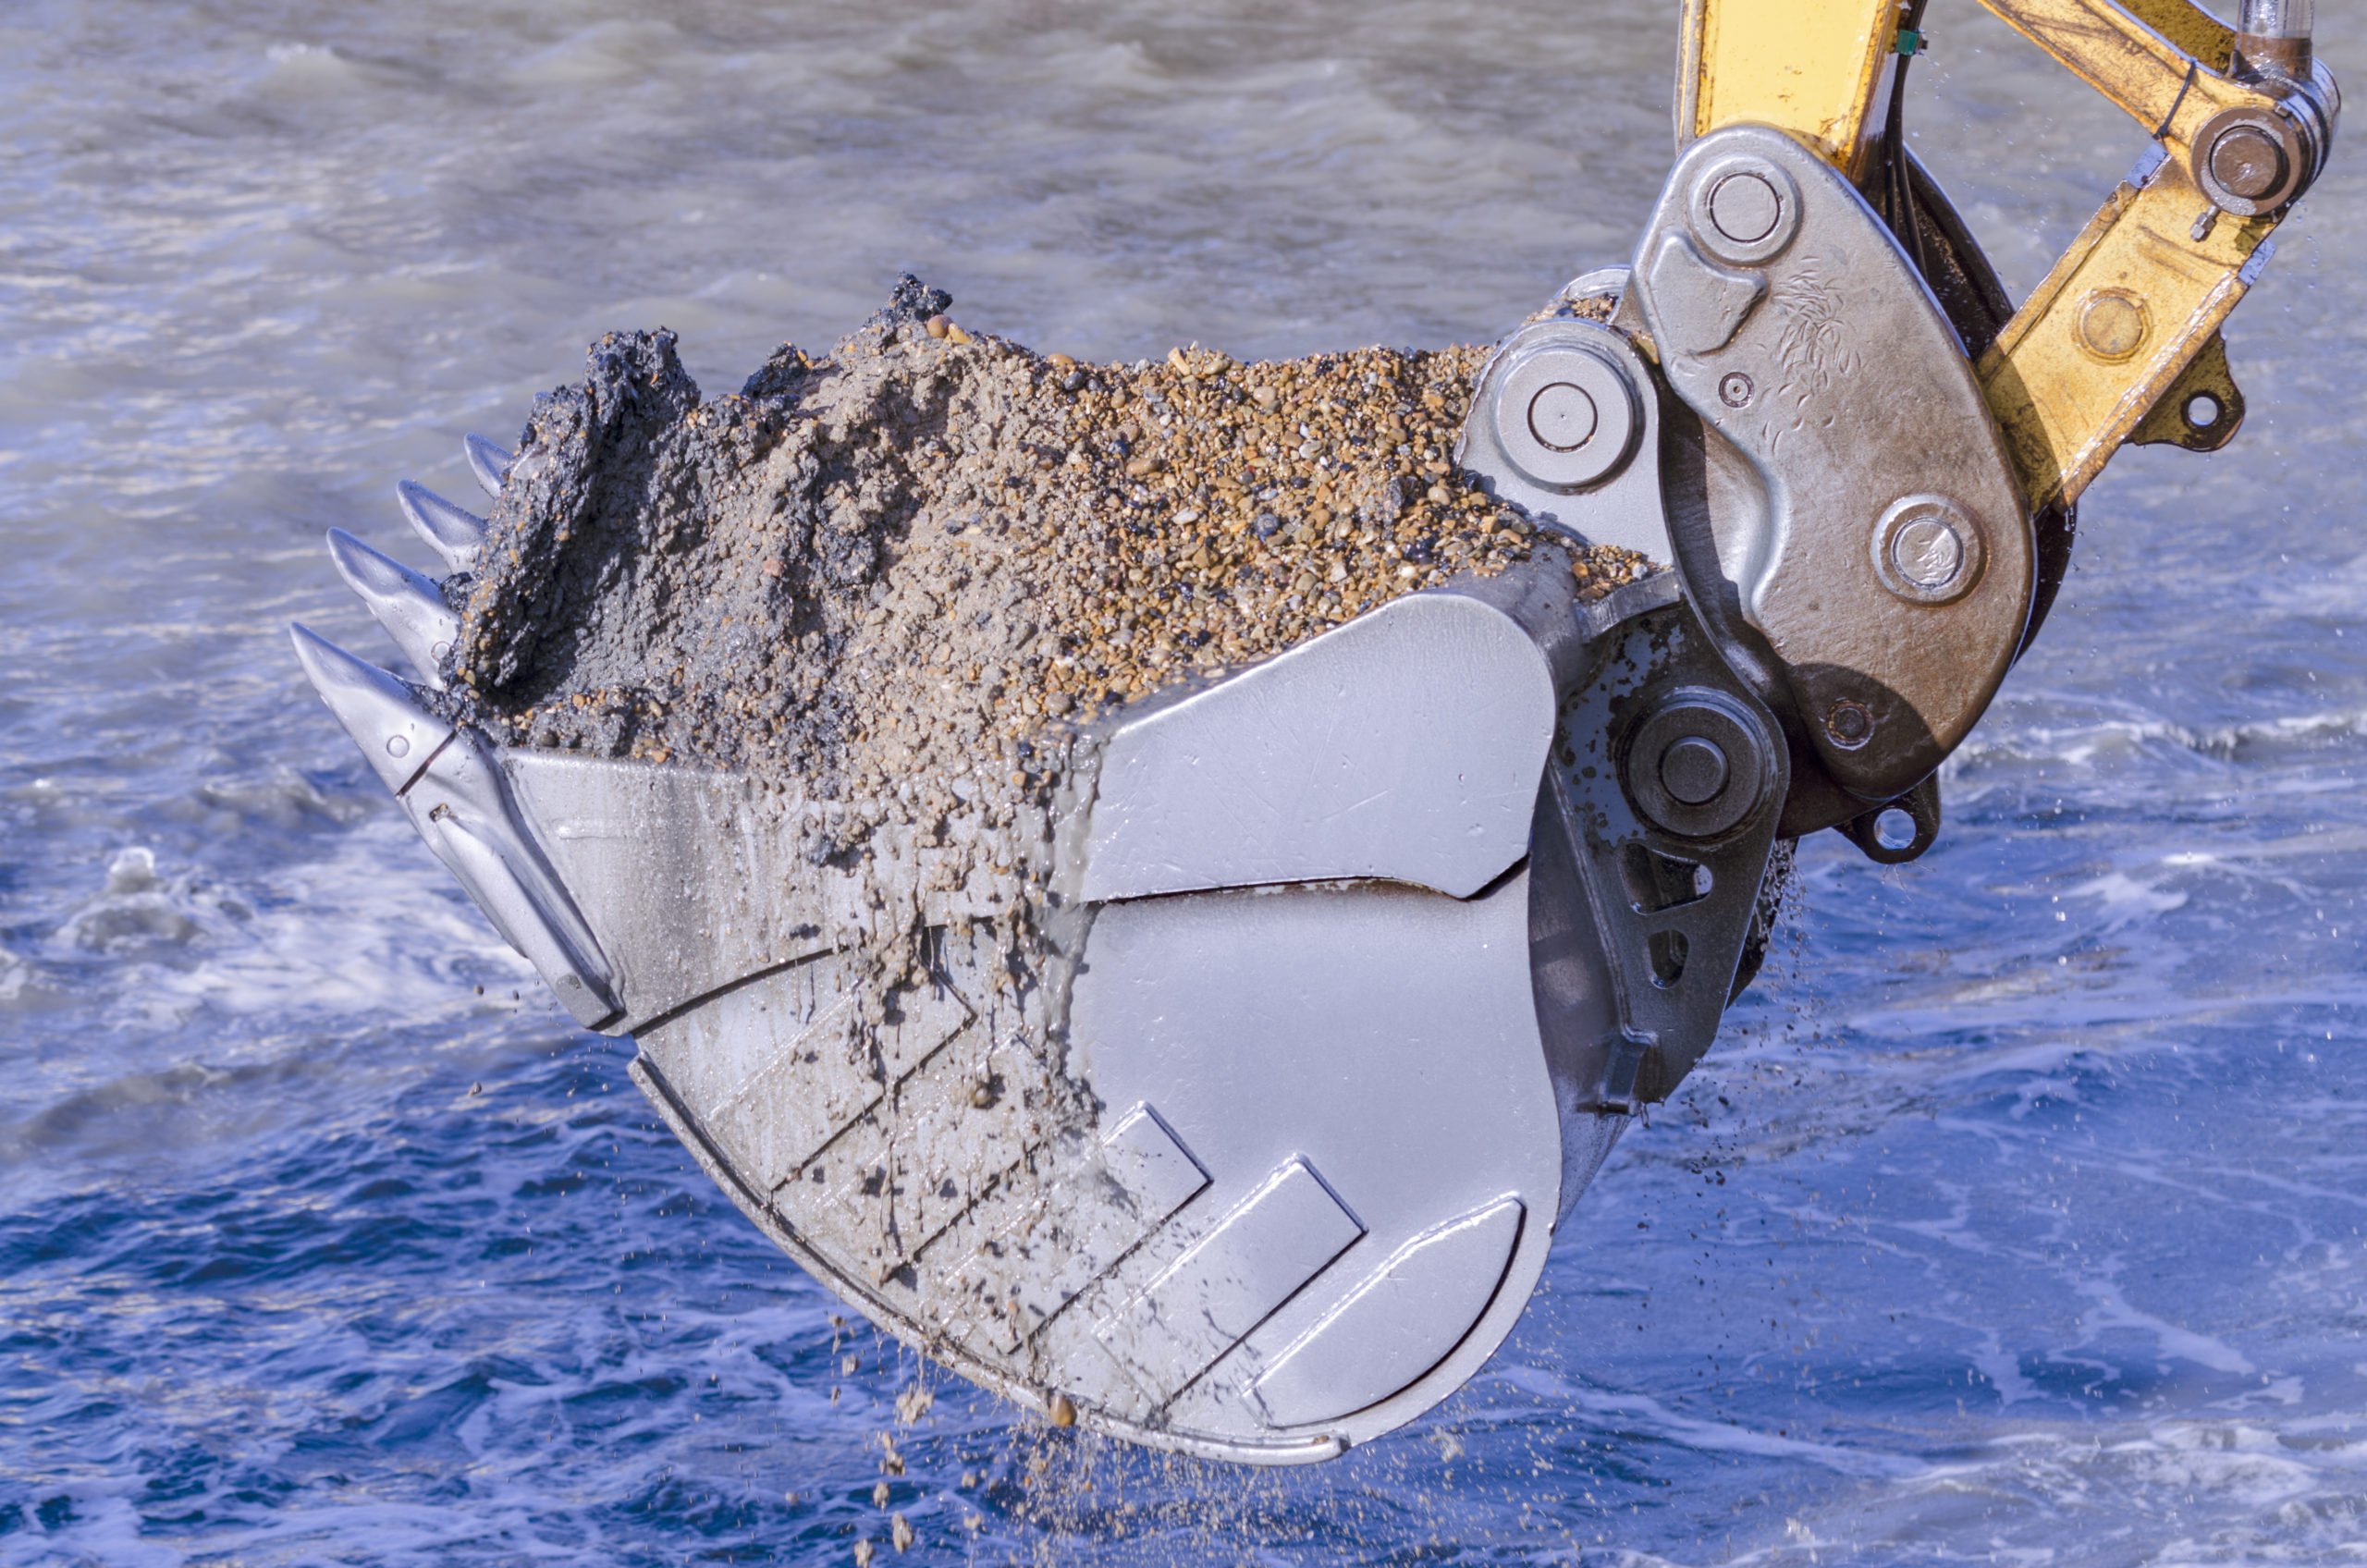 The bucket of an excavator dredges up mud and gravel at the edge of the water.